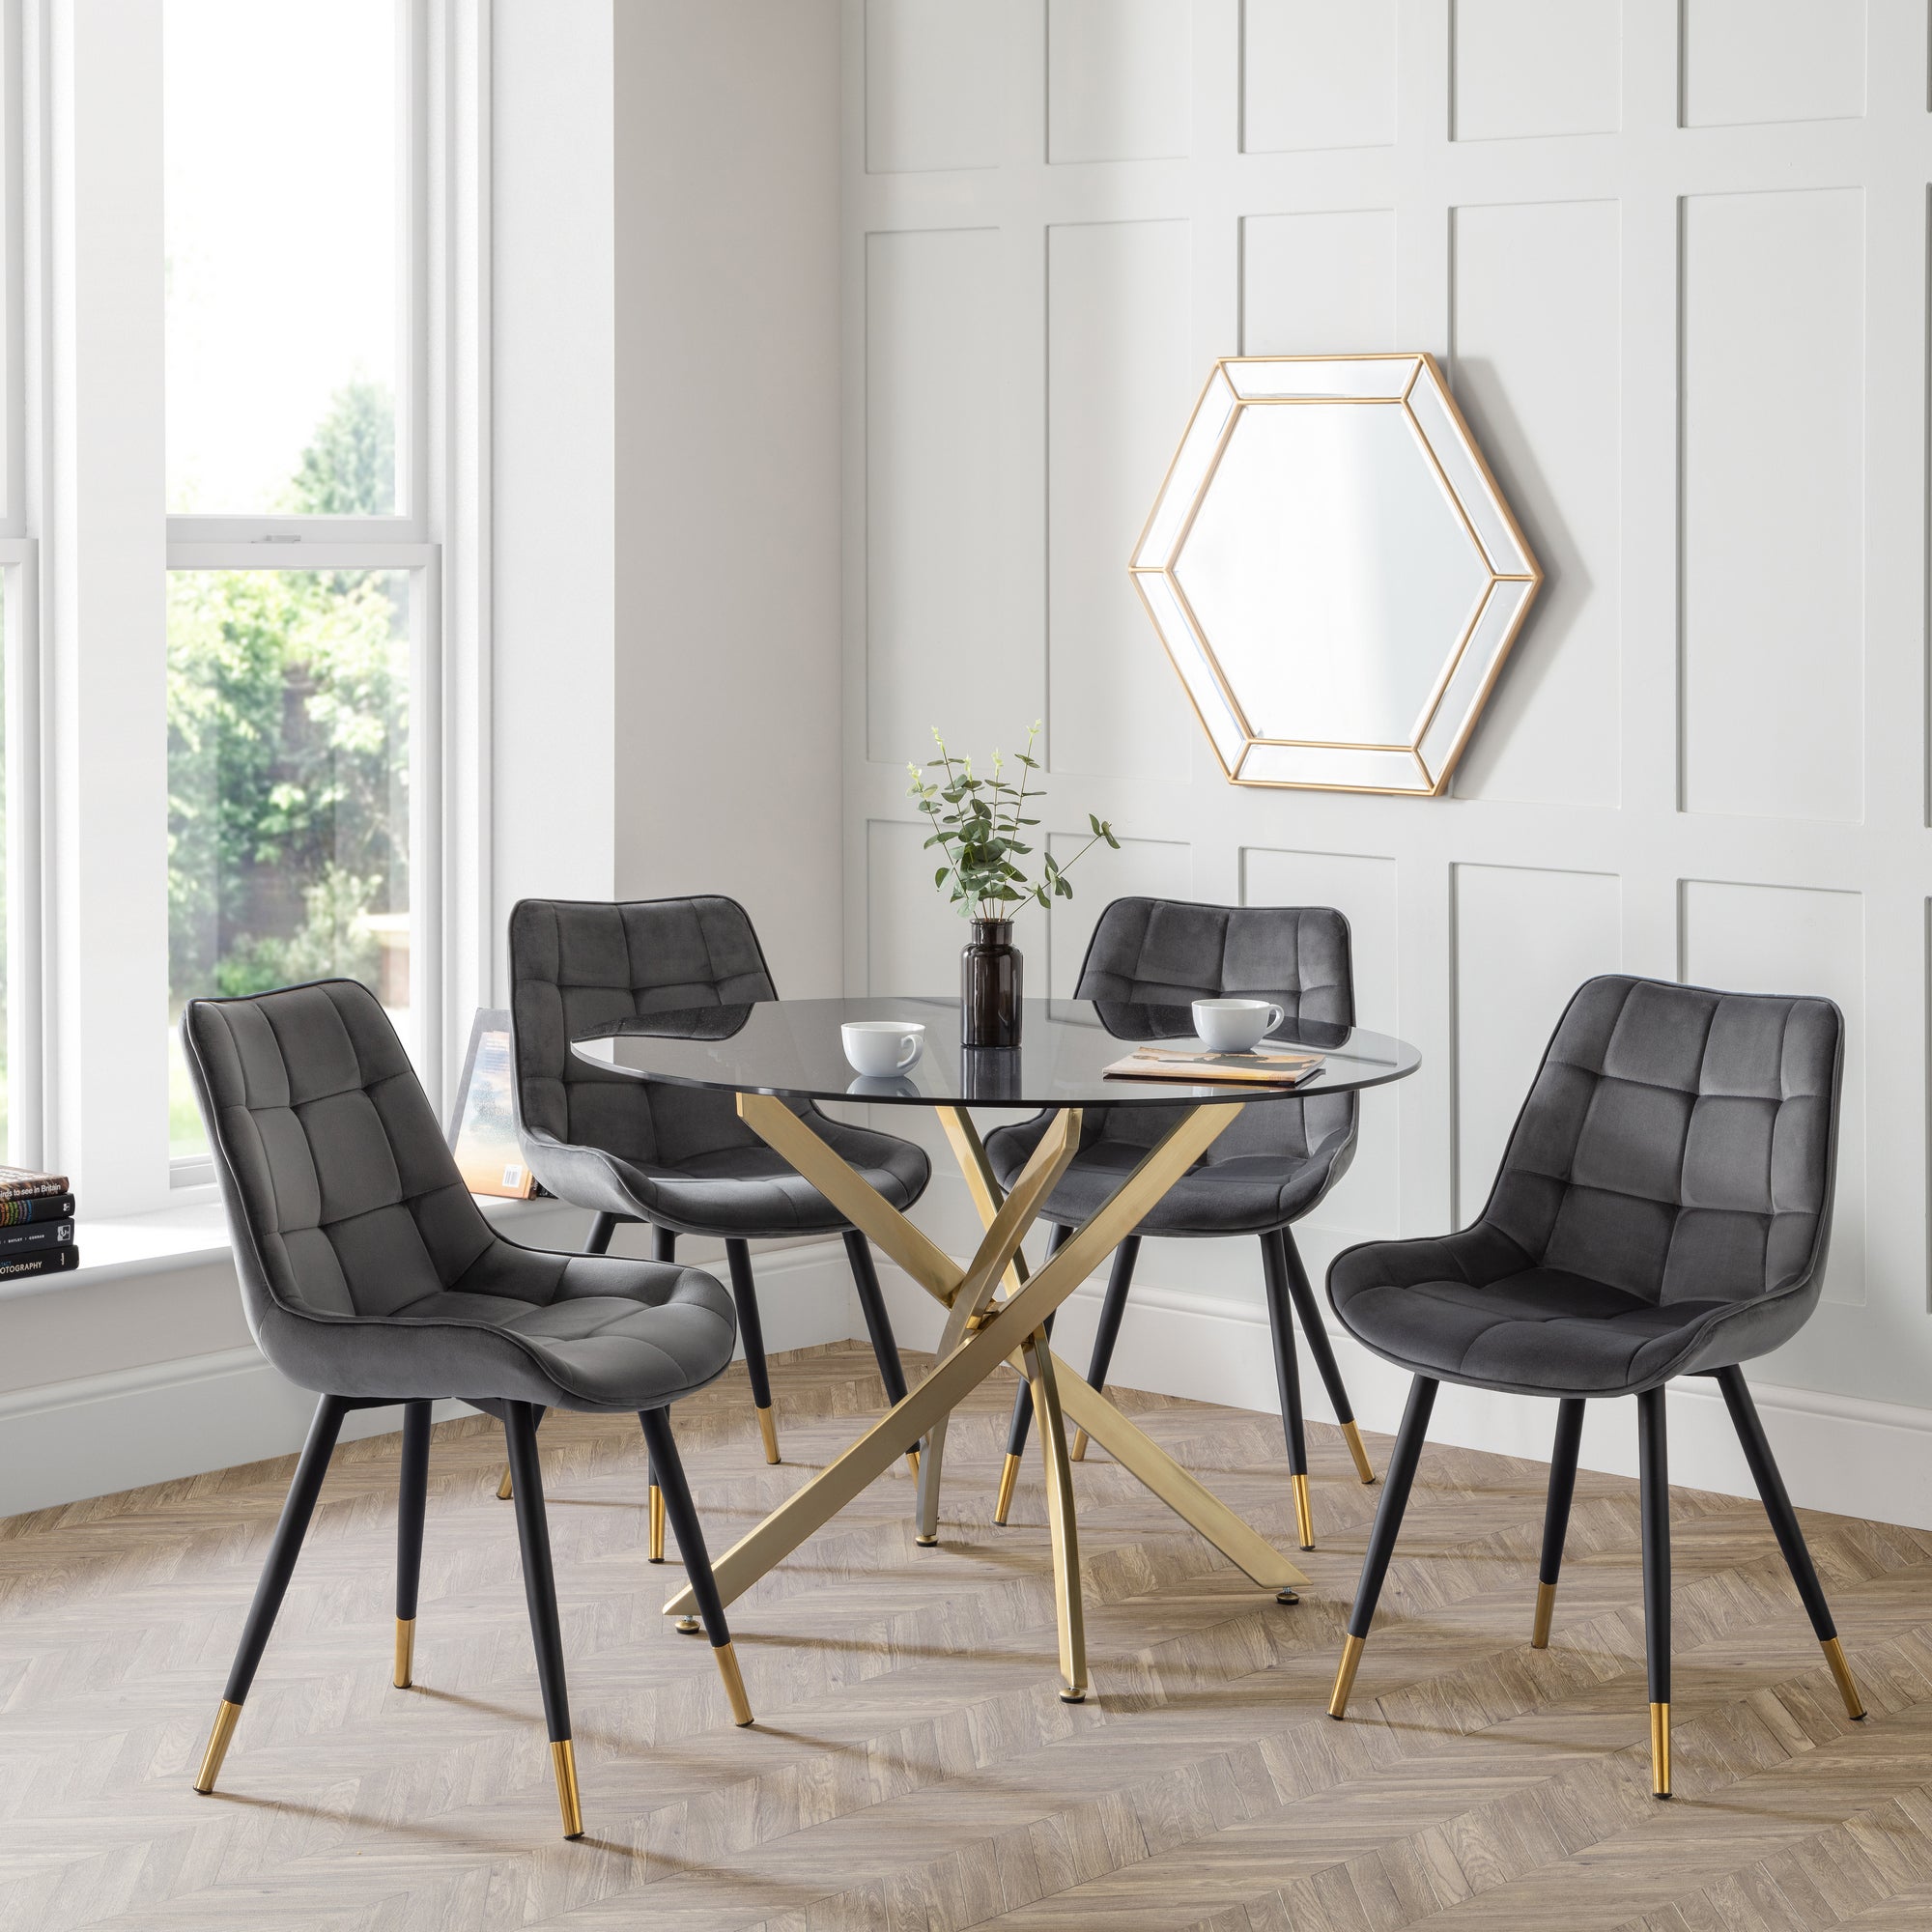 Montero Round Glass Top Dining Table With 4 Hadid Chairs Greycleargold